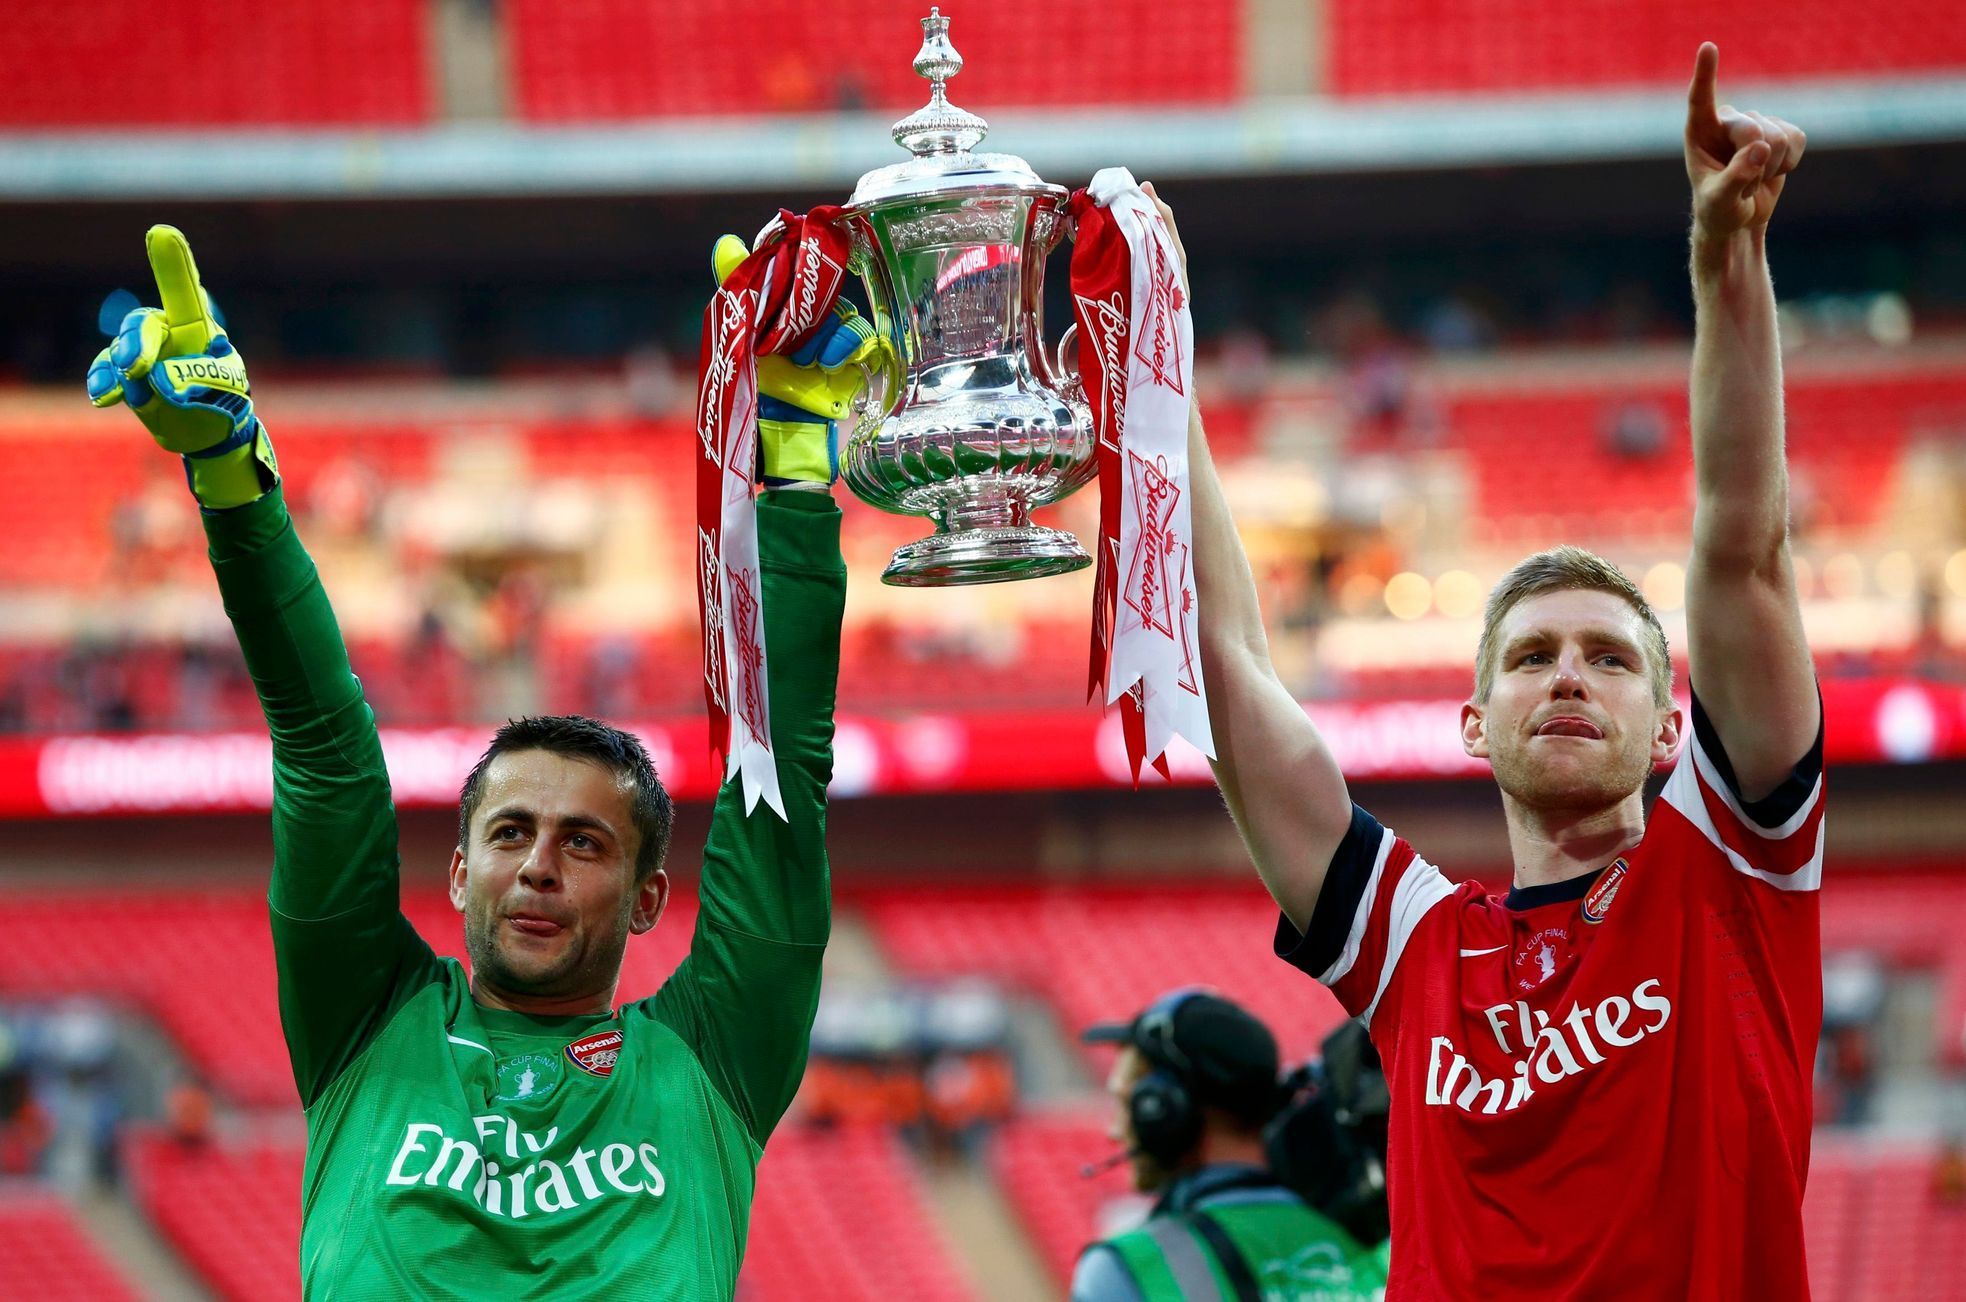 Arsenal's goalkeeper Fabianski and Mertesacker lift the trophy to celebrate their victory against Hull City in their FA Cup final at Wembley Stadium in London